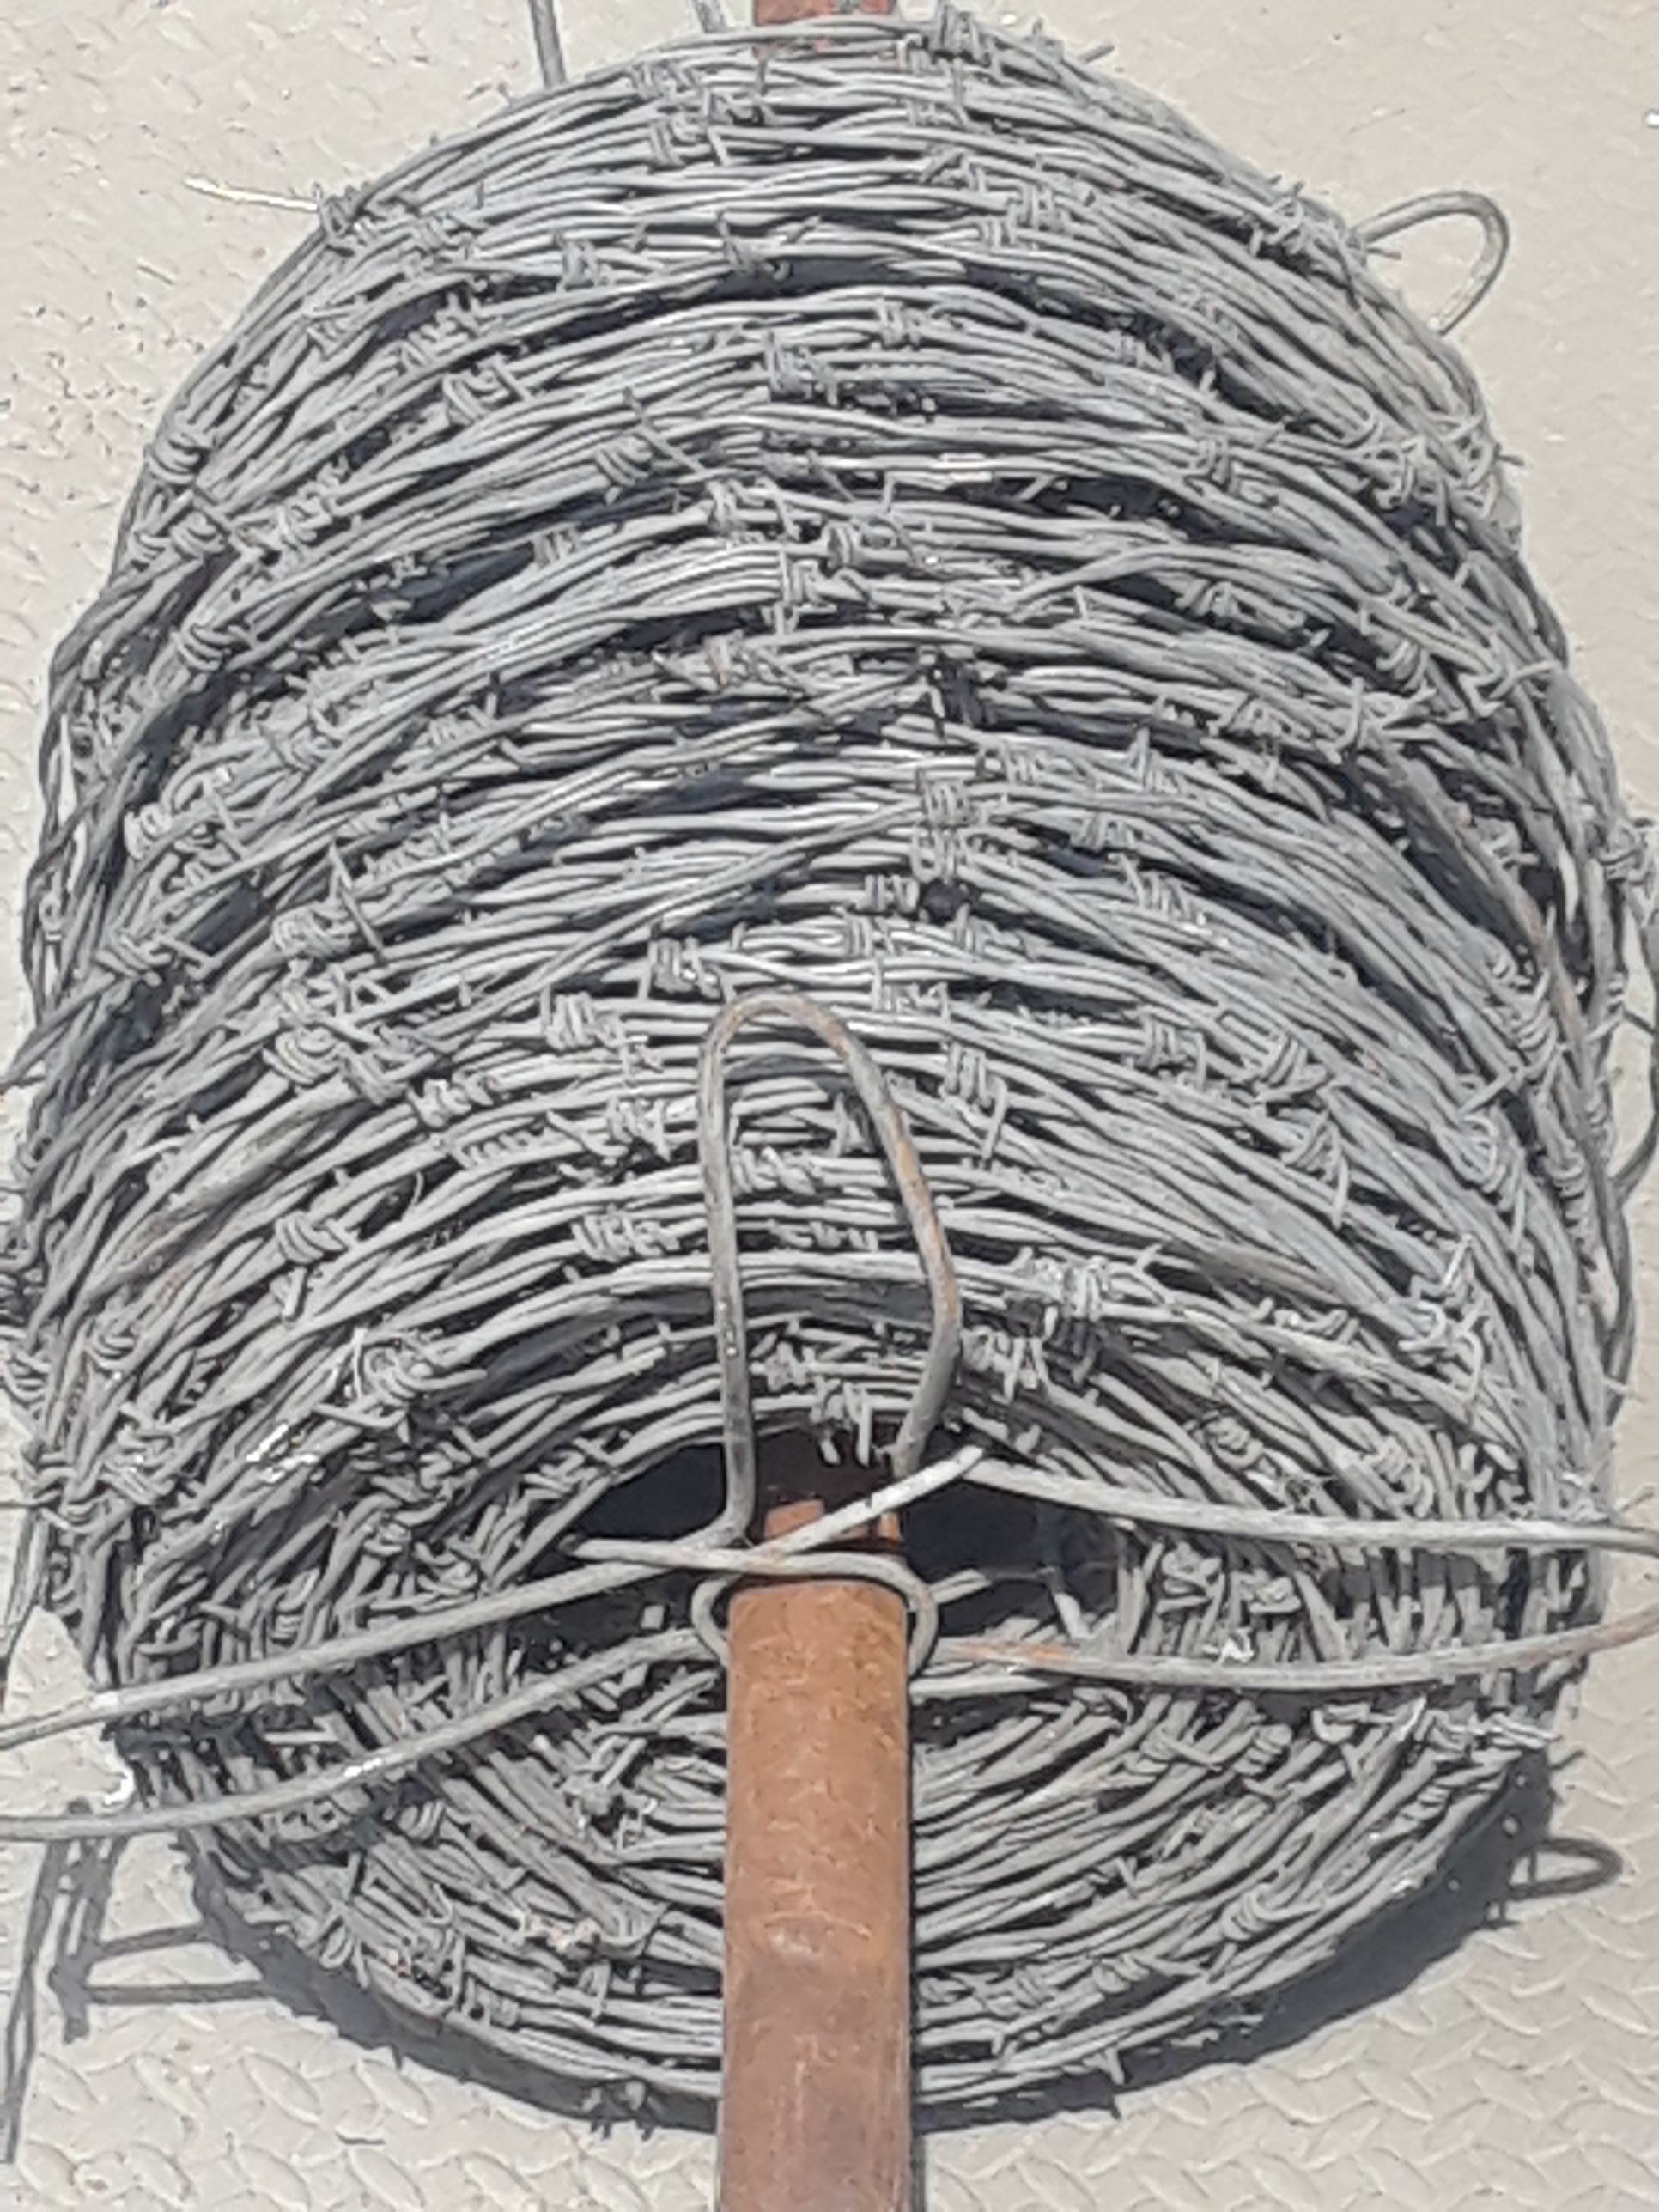 80 LBS COMMERCIAL BARBED WIRE